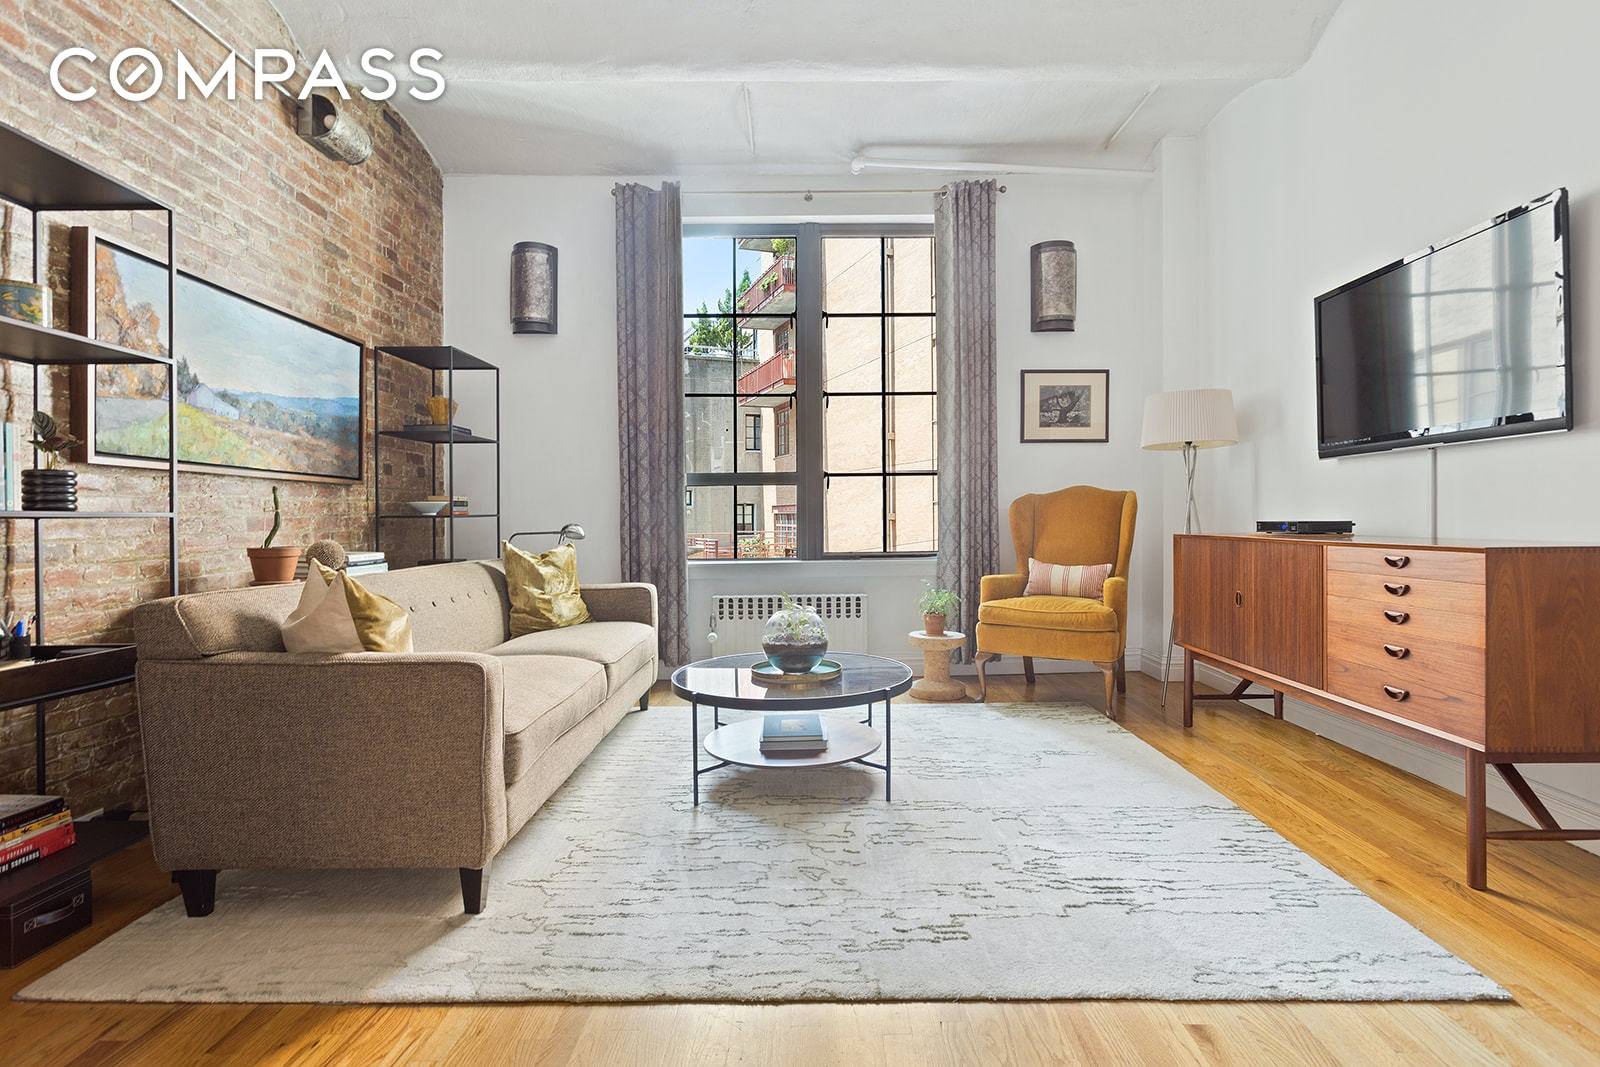 A one bedroom, one bathroom loft with pre war details throughout and located on a tree lined street in prime West Village.